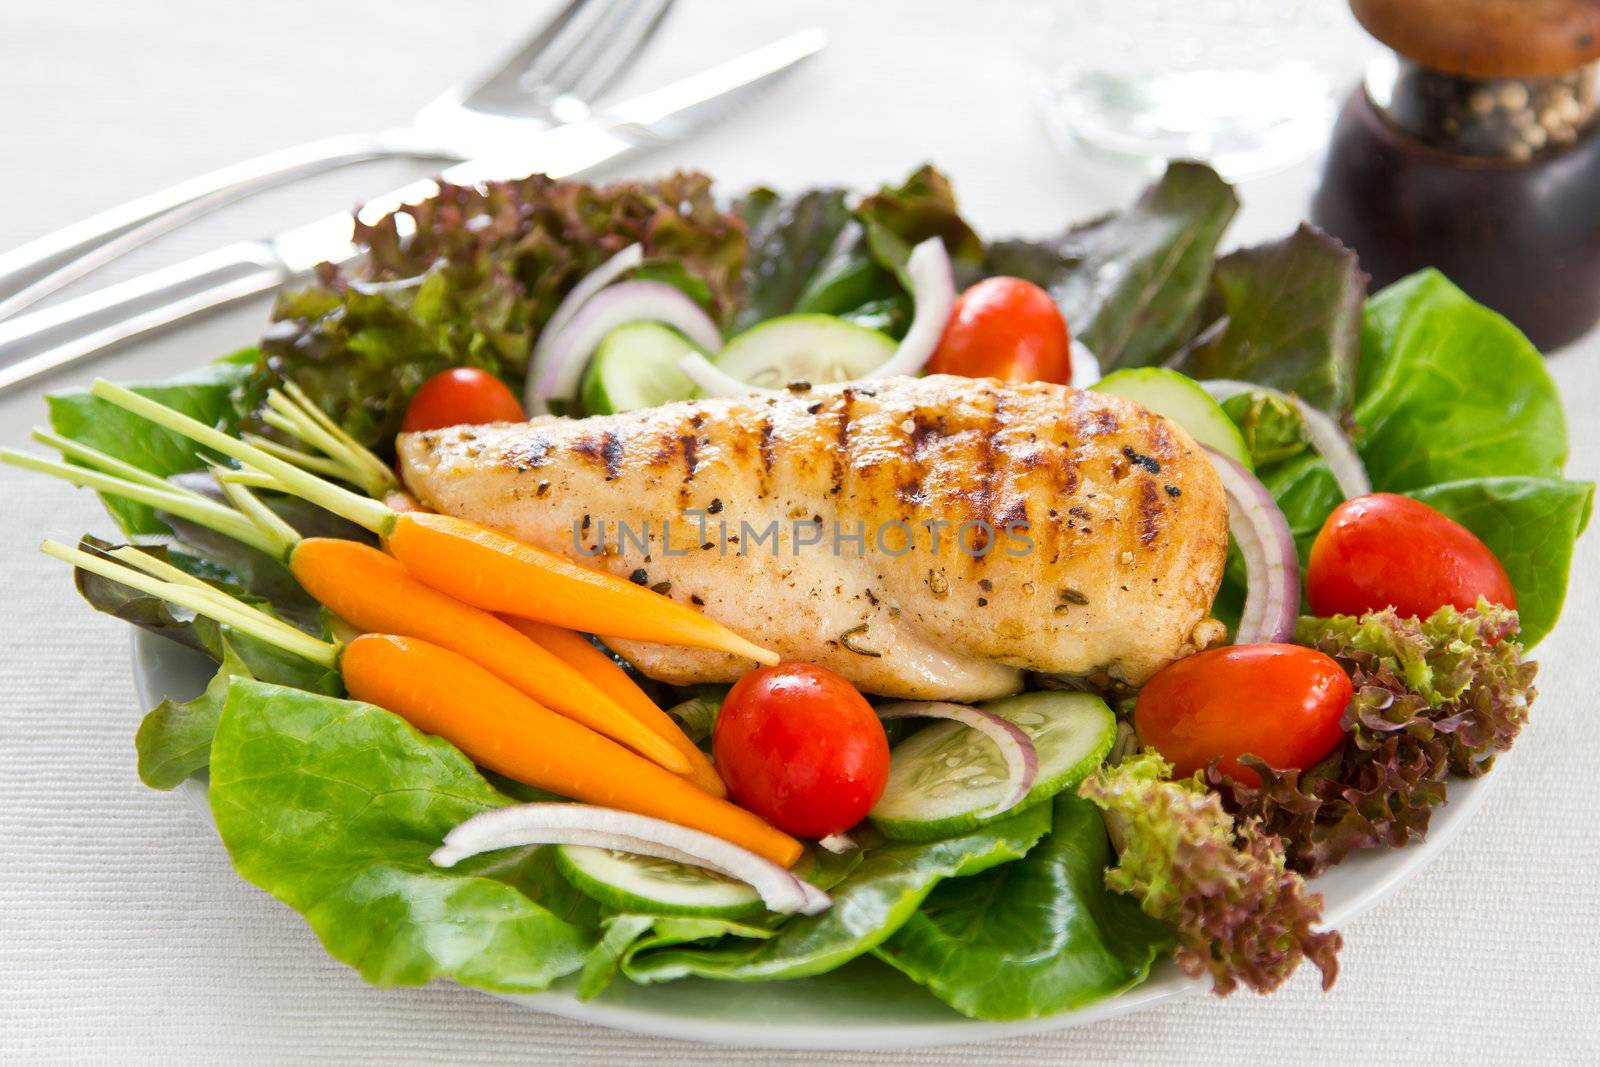 Grilled chicken with lettuce,cherry tomato and baby carrot salad